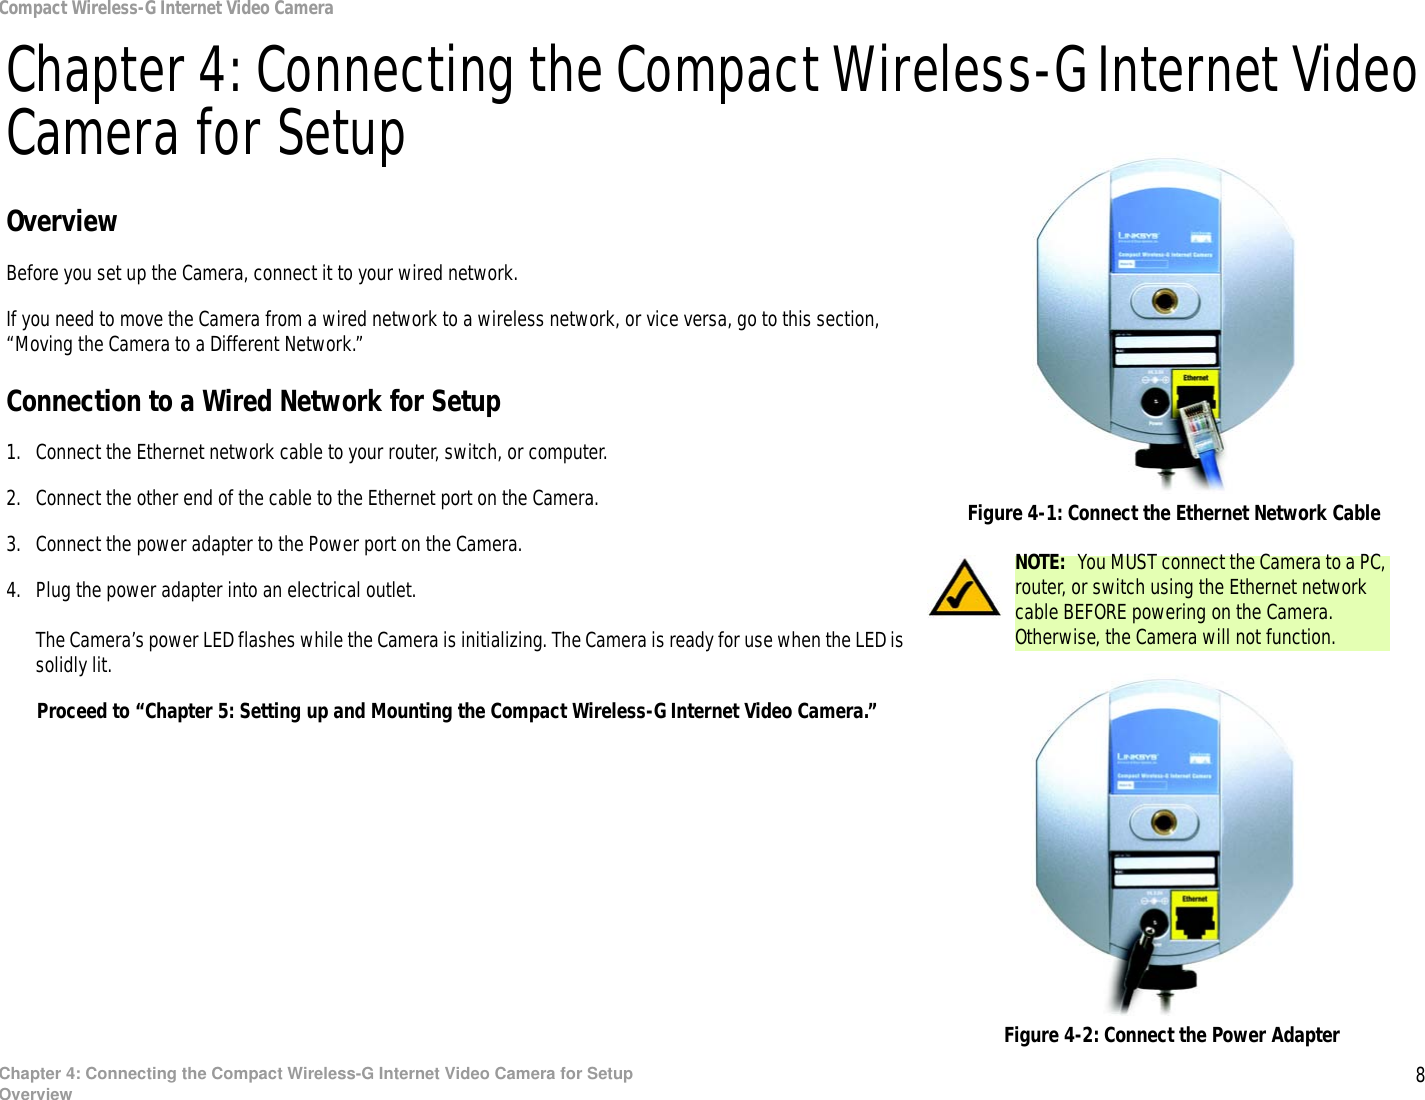 8Chapter 4: Connecting the Compact Wireless-G Internet Video Camera for SetupOverviewCompact Wireless-G Internet Video CameraChapter 4: Connecting the Compact Wireless-G Internet Video Camera for SetupOverviewBefore you set up the Camera, connect it to your wired network.If you need to move the Camera from a wired network to a wireless network, or vice versa, go to this section, “Moving the Camera to a Different Network.”Connection to a Wired Network for Setup1. Connect the Ethernet network cable to your router, switch, or computer.2. Connect the other end of the cable to the Ethernet port on the Camera.3. Connect the power adapter to the Power port on the Camera.4. Plug the power adapter into an electrical outlet.The Camera’s power LED flashes while the Camera is initializing. The Camera is ready for use when the LED is solidly lit.Proceed to “Chapter 5: Setting up and Mounting the Compact Wireless-G Internet Video Camera.”NOTE:  You MUST connect the Camera to a PC, router, or switch using the Ethernet network cable BEFORE powering on the Camera. Otherwise, the Camera will not function.Figure 4-2: Connect the Power AdapterFigure 4-1: Connect the Ethernet Network Cable